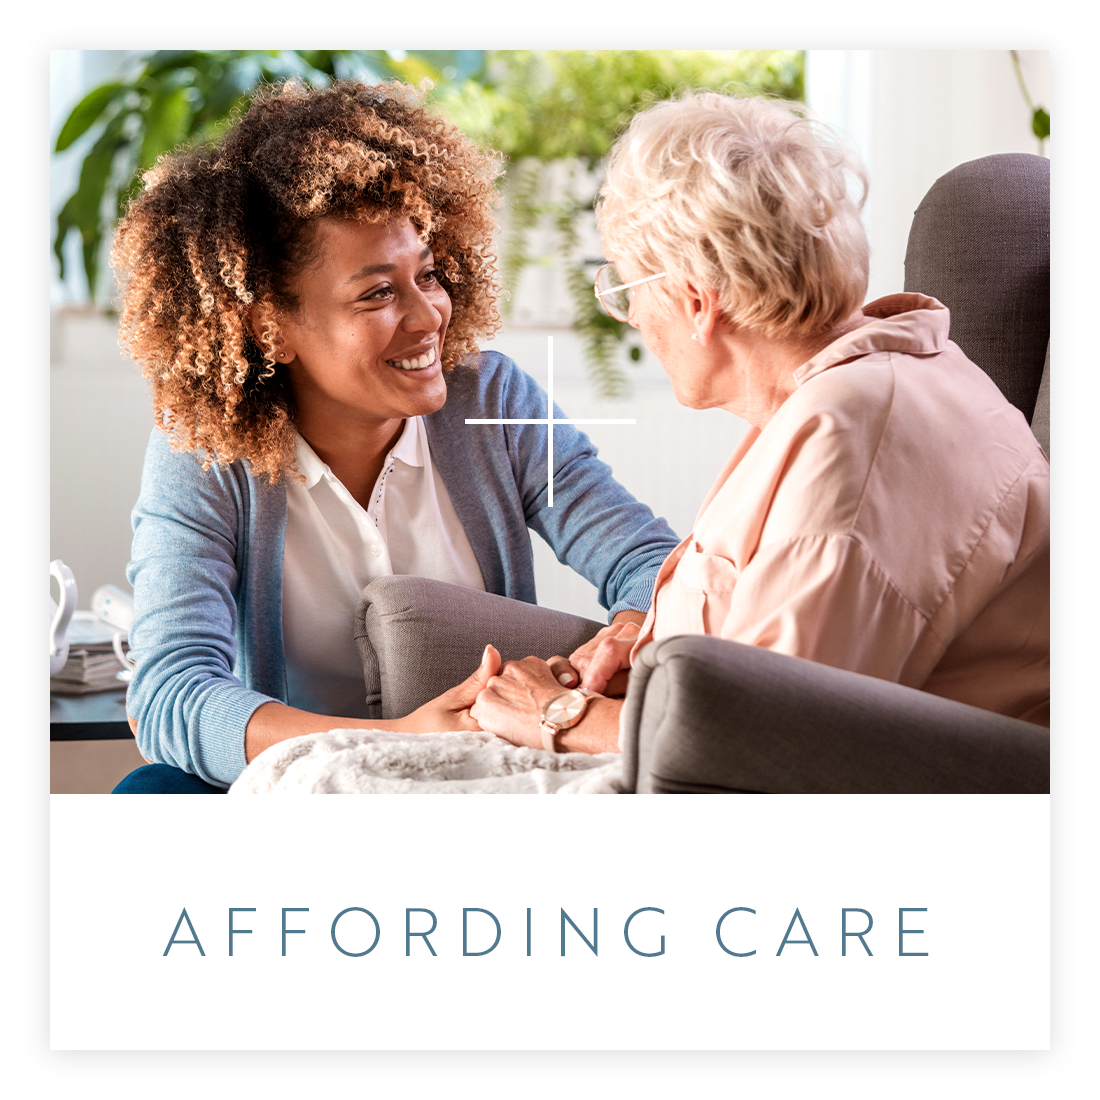 Learn about affording care at The Meridian at Brandon in Tampa, Florida